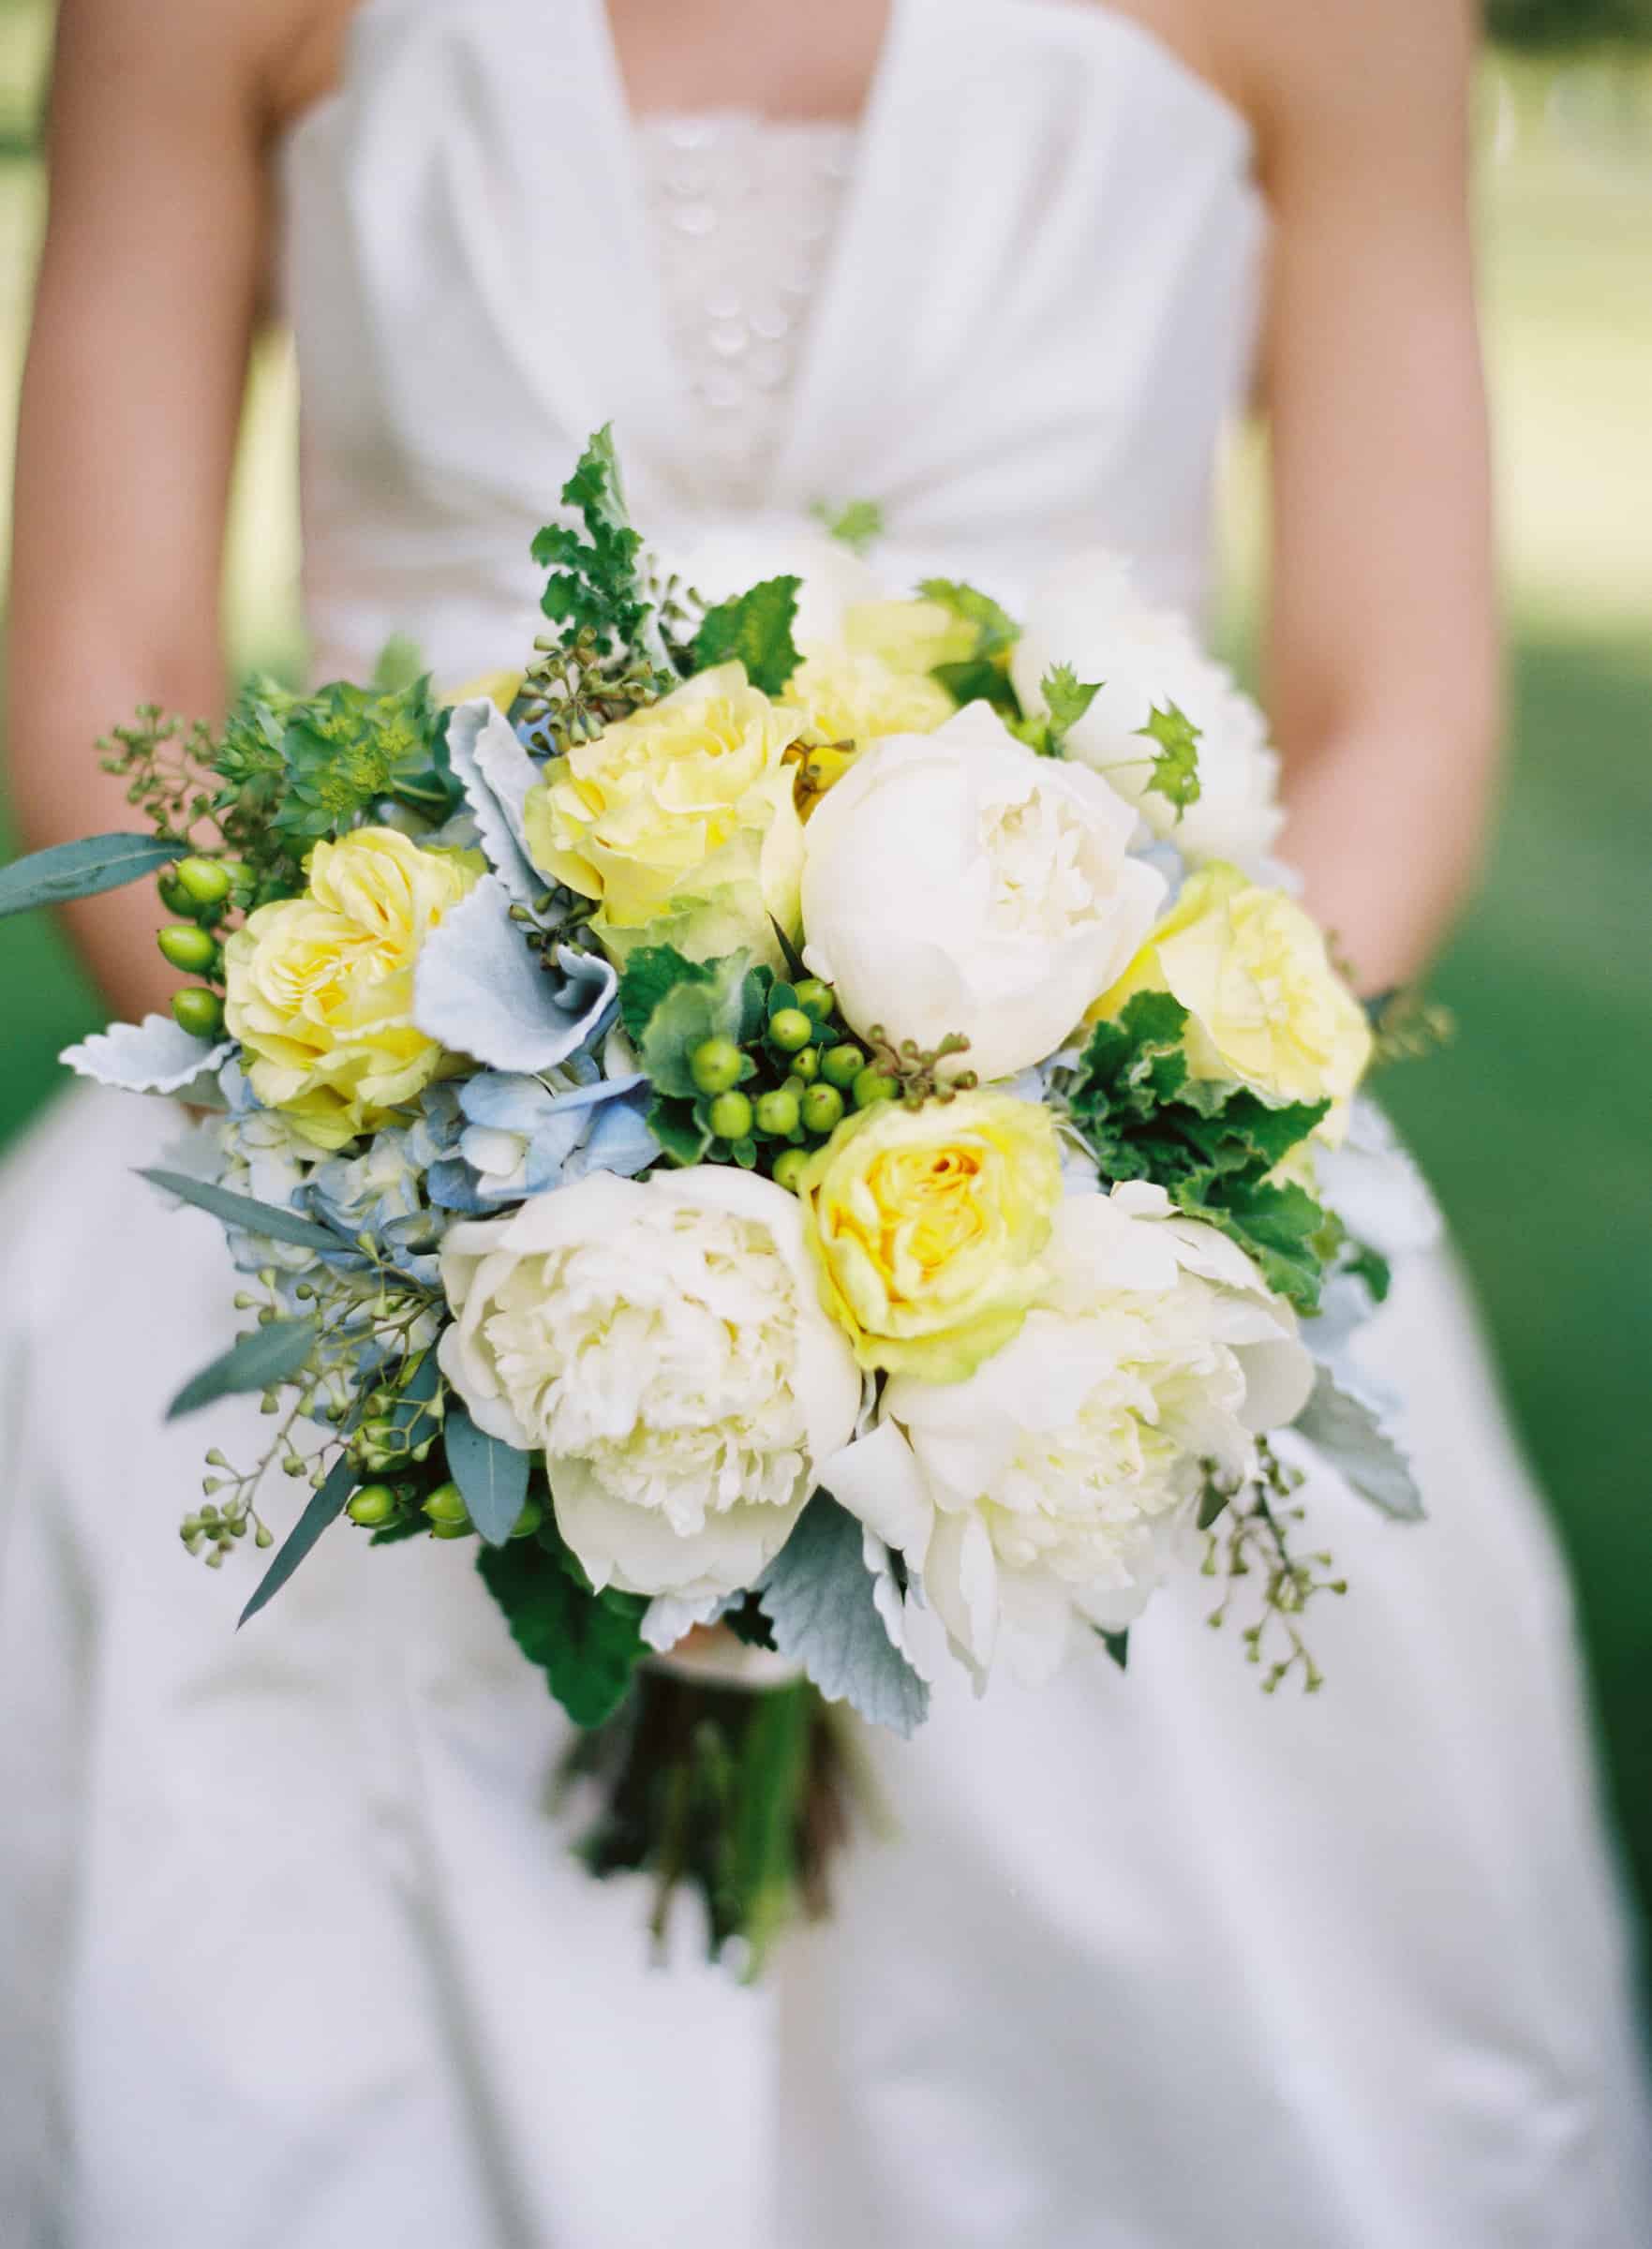 bride holding bouquet with yellow, white and blue flowers